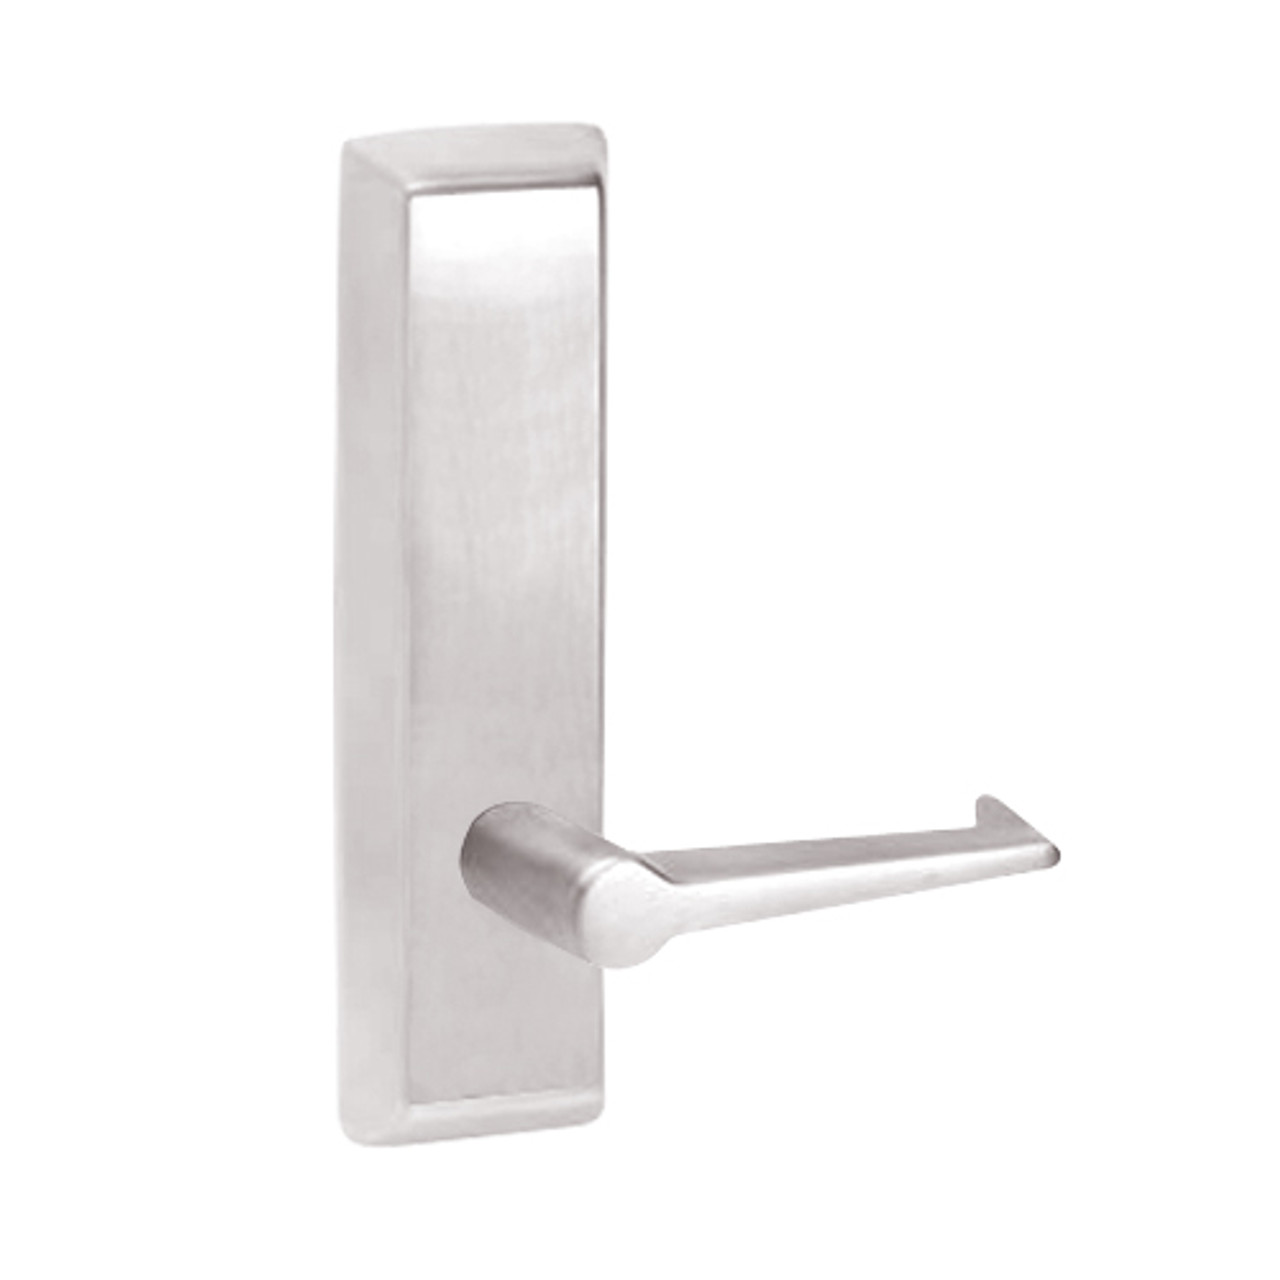 E950-629-RHR Corbin ED5000 Series Exit Device Trim with Dummy Essex Lever in Bright Stainless Steel Finish